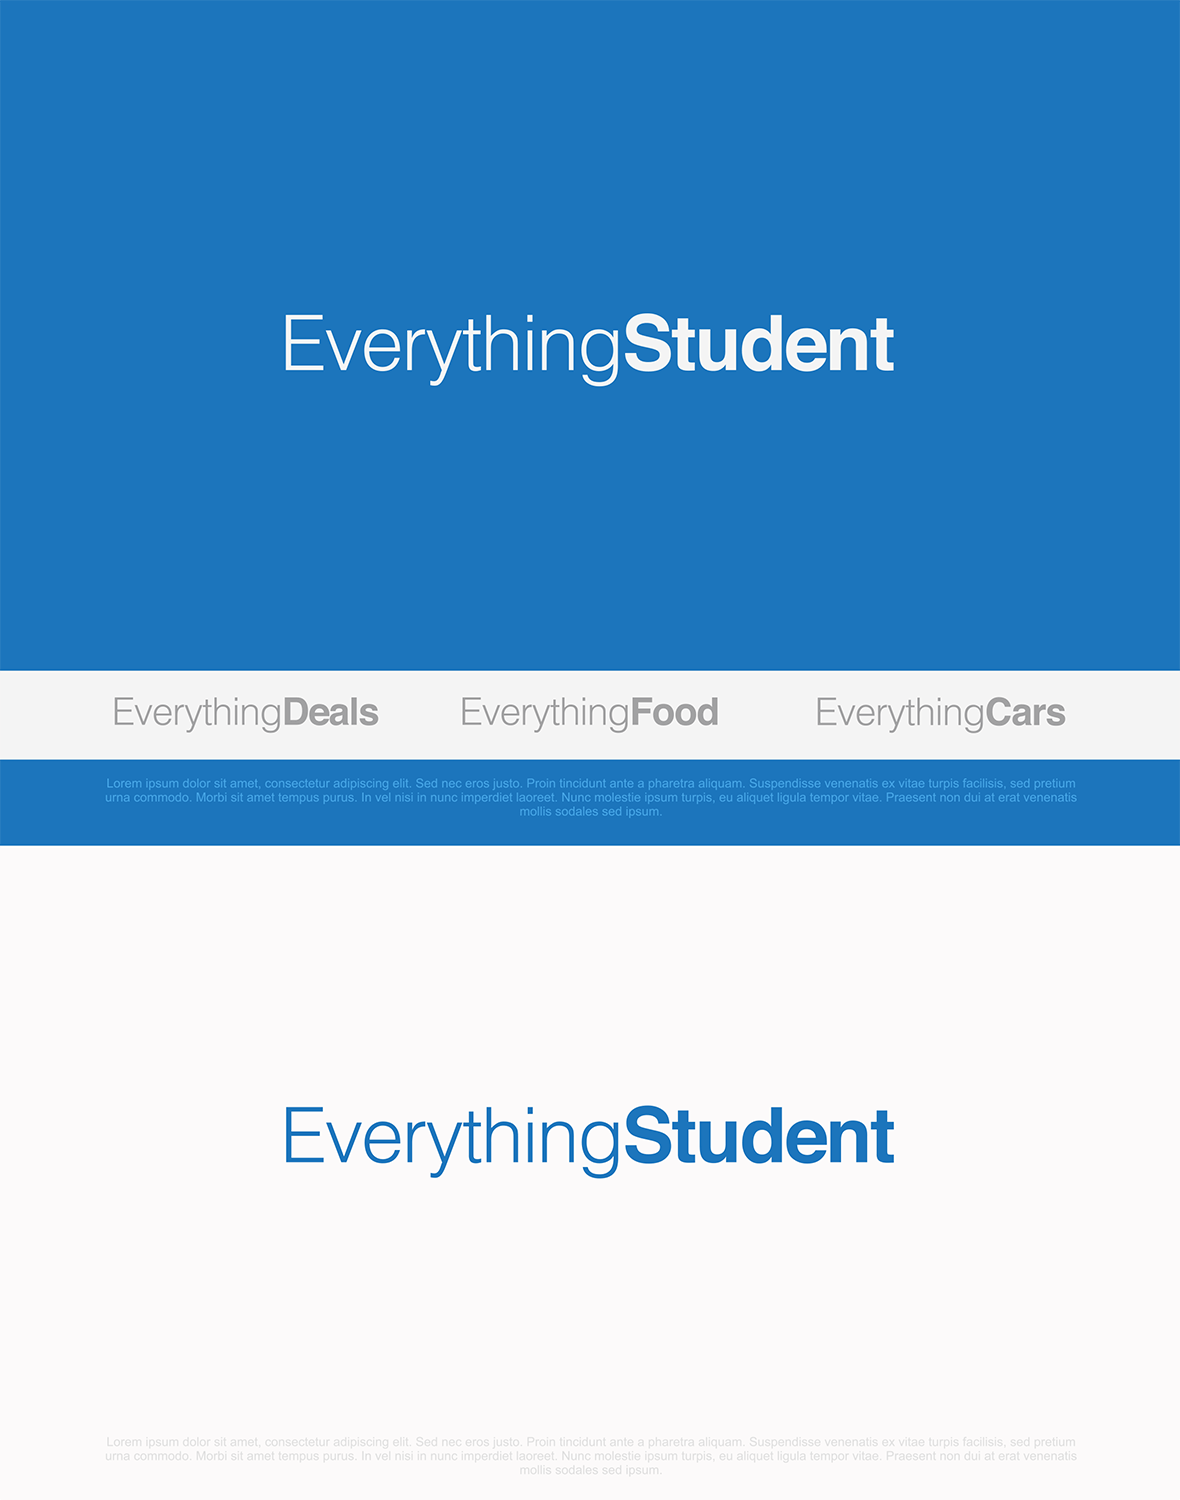 Everything Entertainment Logo - Personable, Elegant, Entertainment Logo Design for EverythingStudent ...